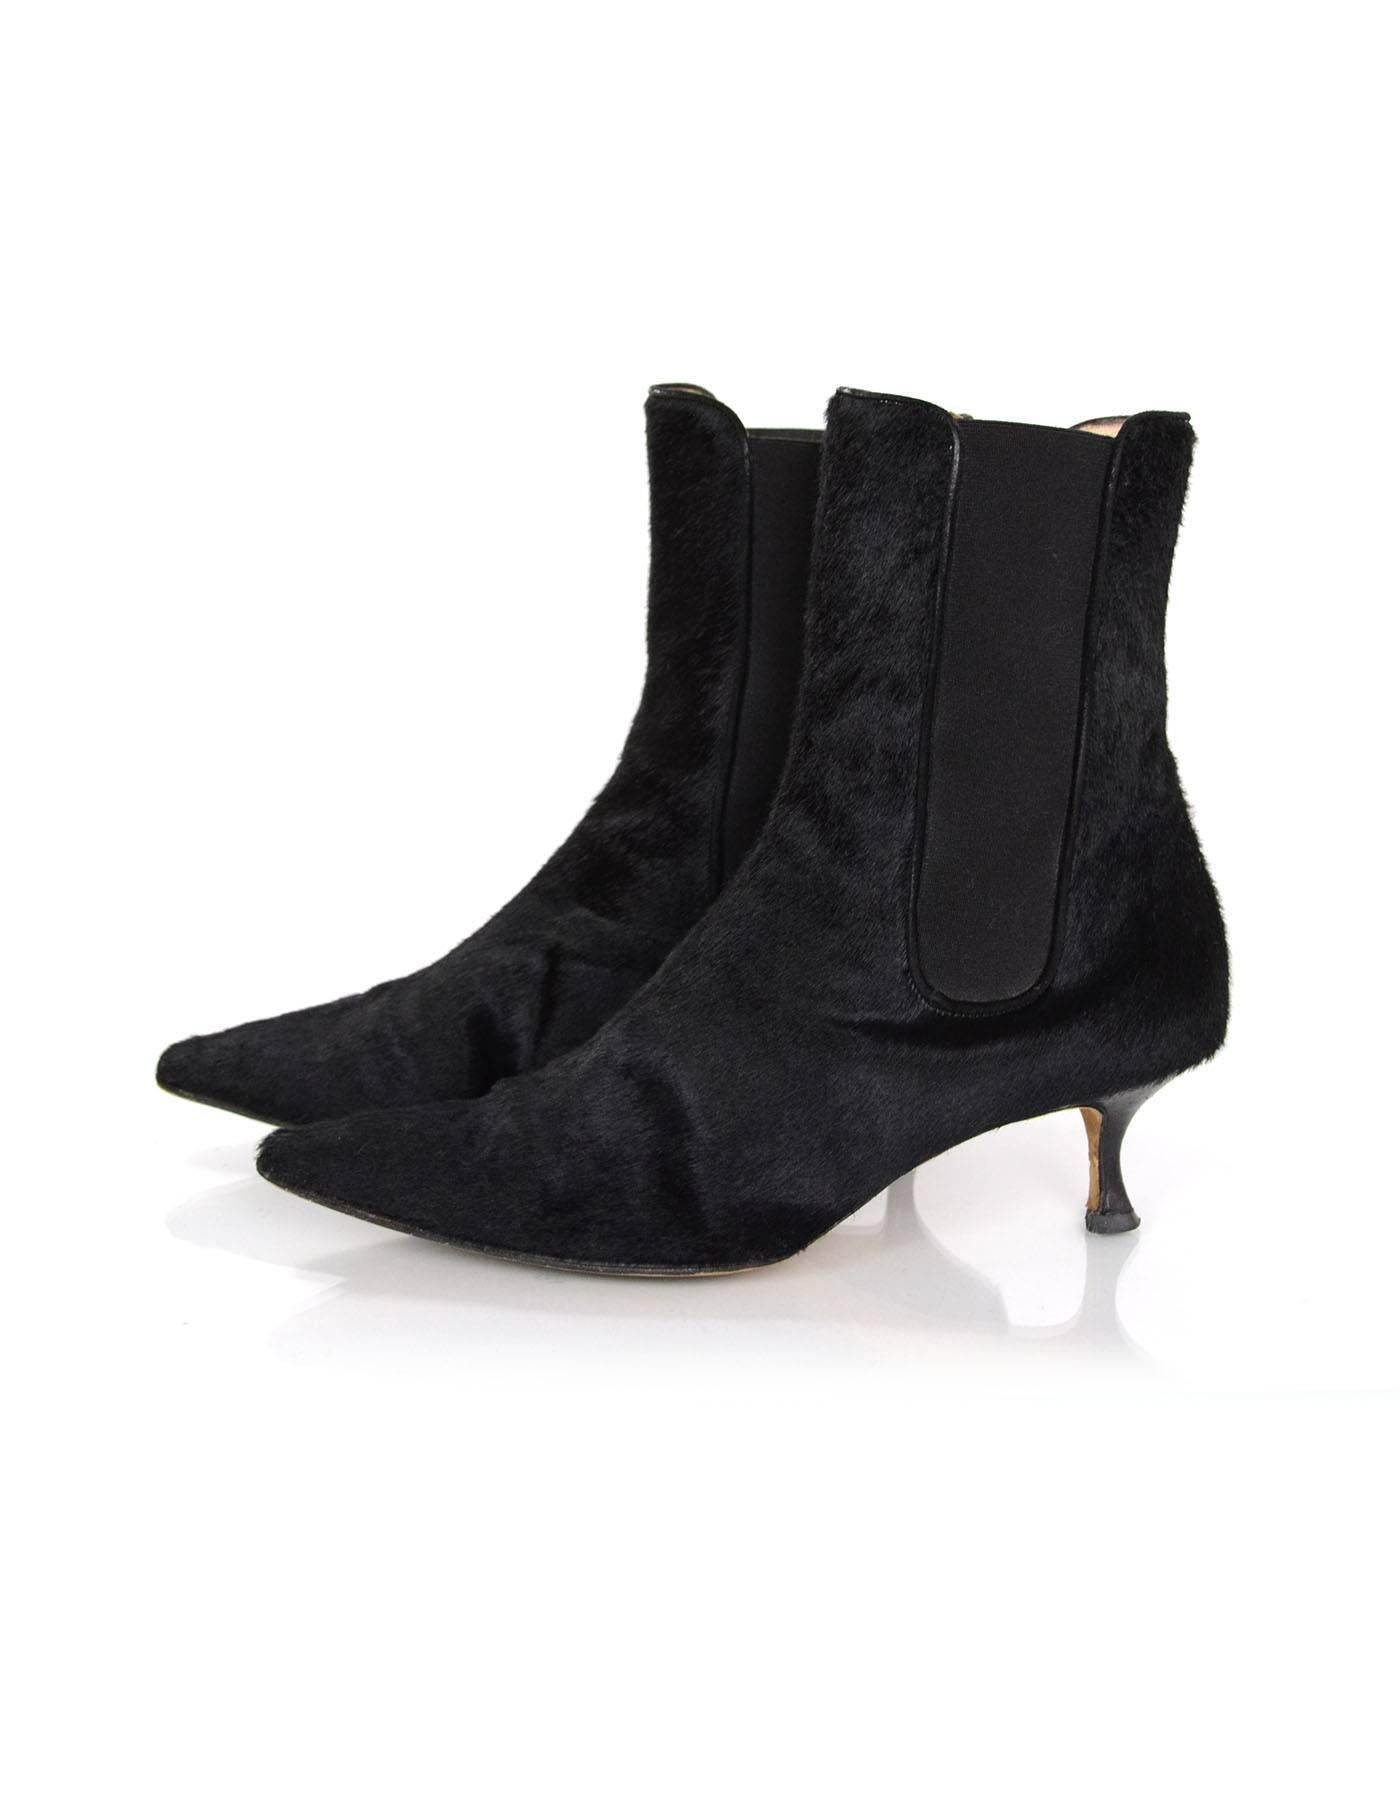 Manolo Blahnik Black Ponyhair Ankle Boots Sz 40
Color: Black
Materials: Ponyhair
Closure/Opening: Slide on with stretch sides
Sole Stamp: Manolo Blahnik 40
Overall Condition: Very good pre-owned condition with the exception of being re-soled,